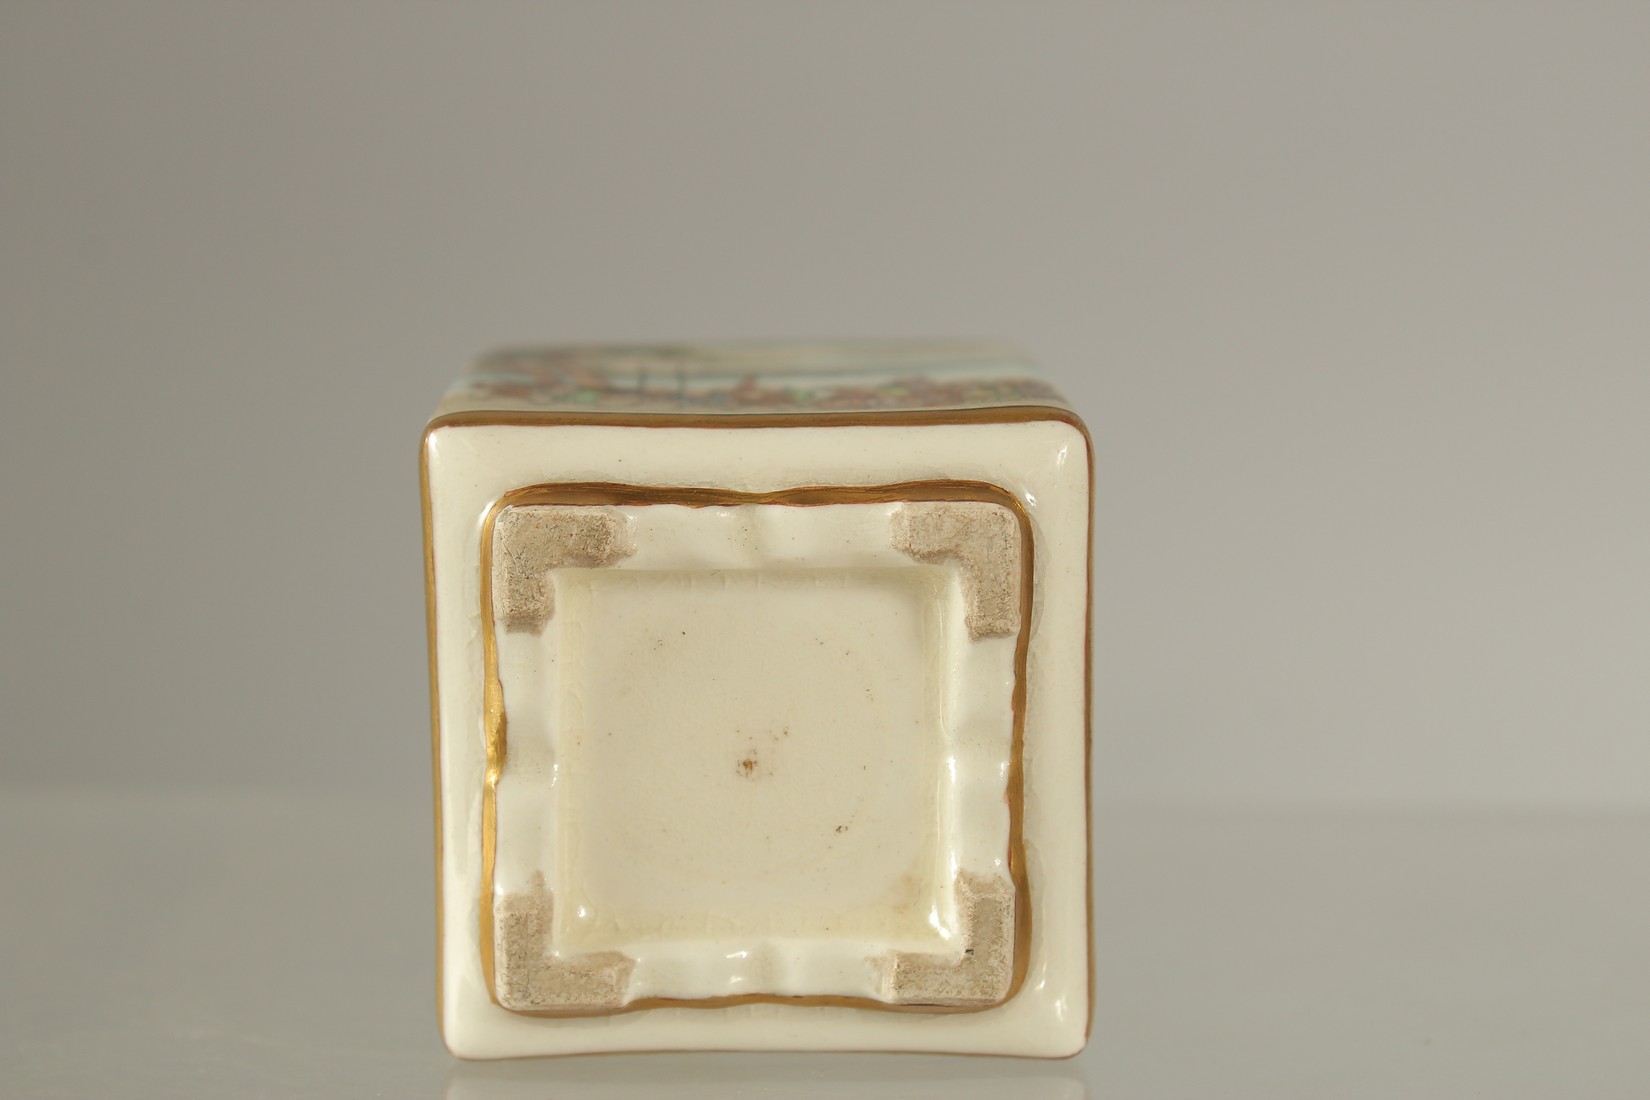 A FINE JAPANESE MEIJI PERIOD SATSUMA SQUARE-FORM MINIATURE VASE, delicately painted with a - Image 7 of 7